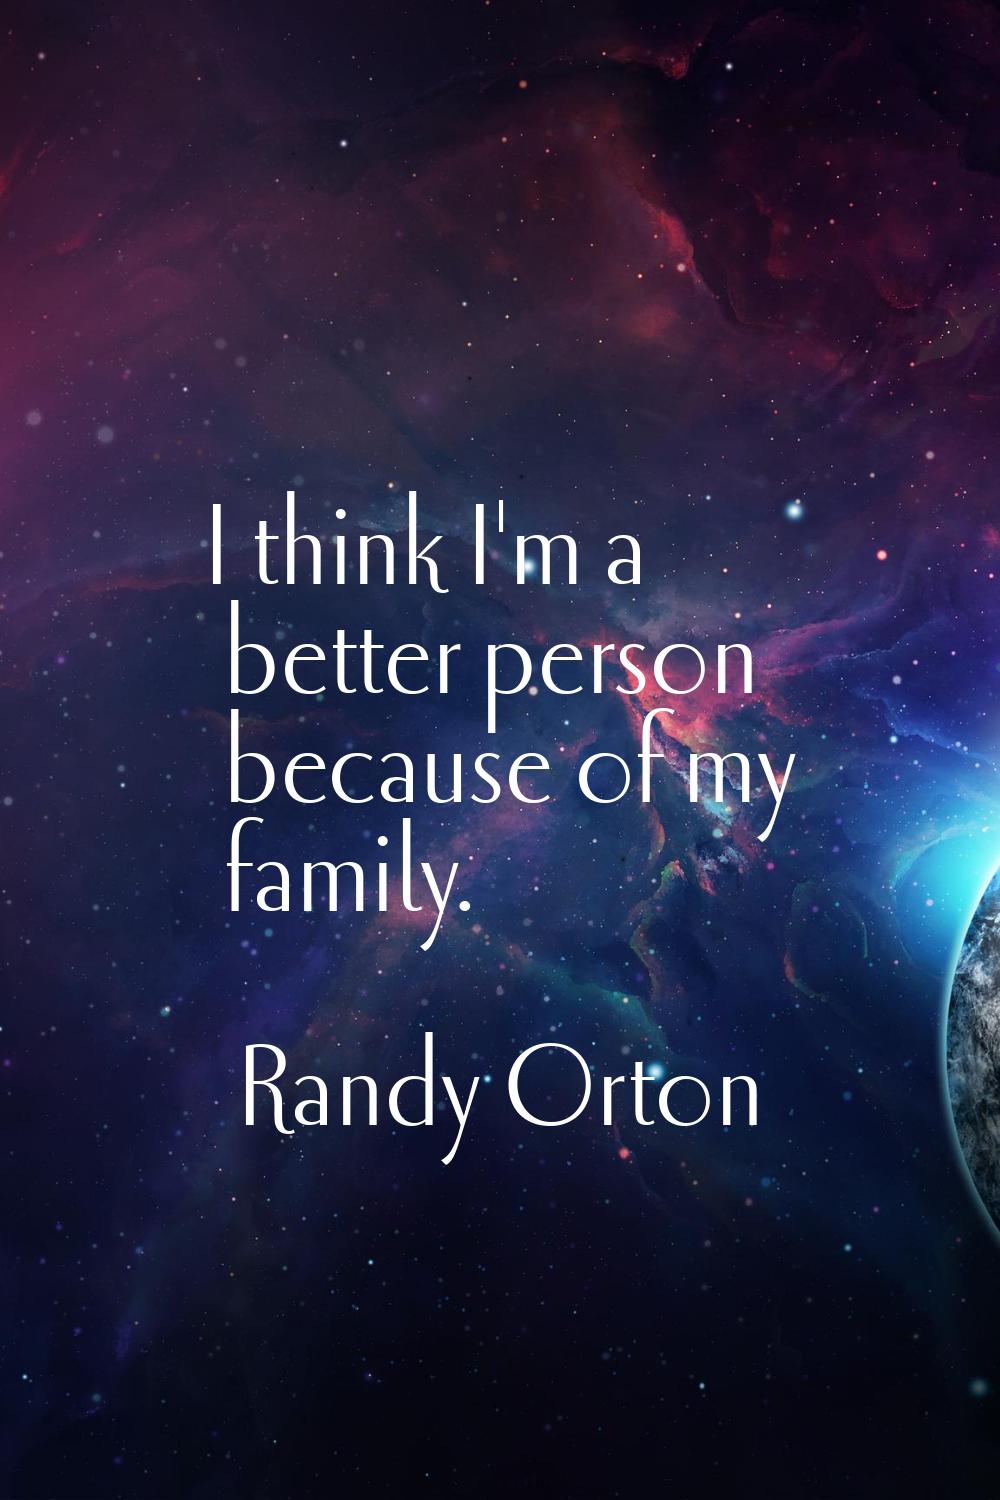 I think I'm a better person because of my family.